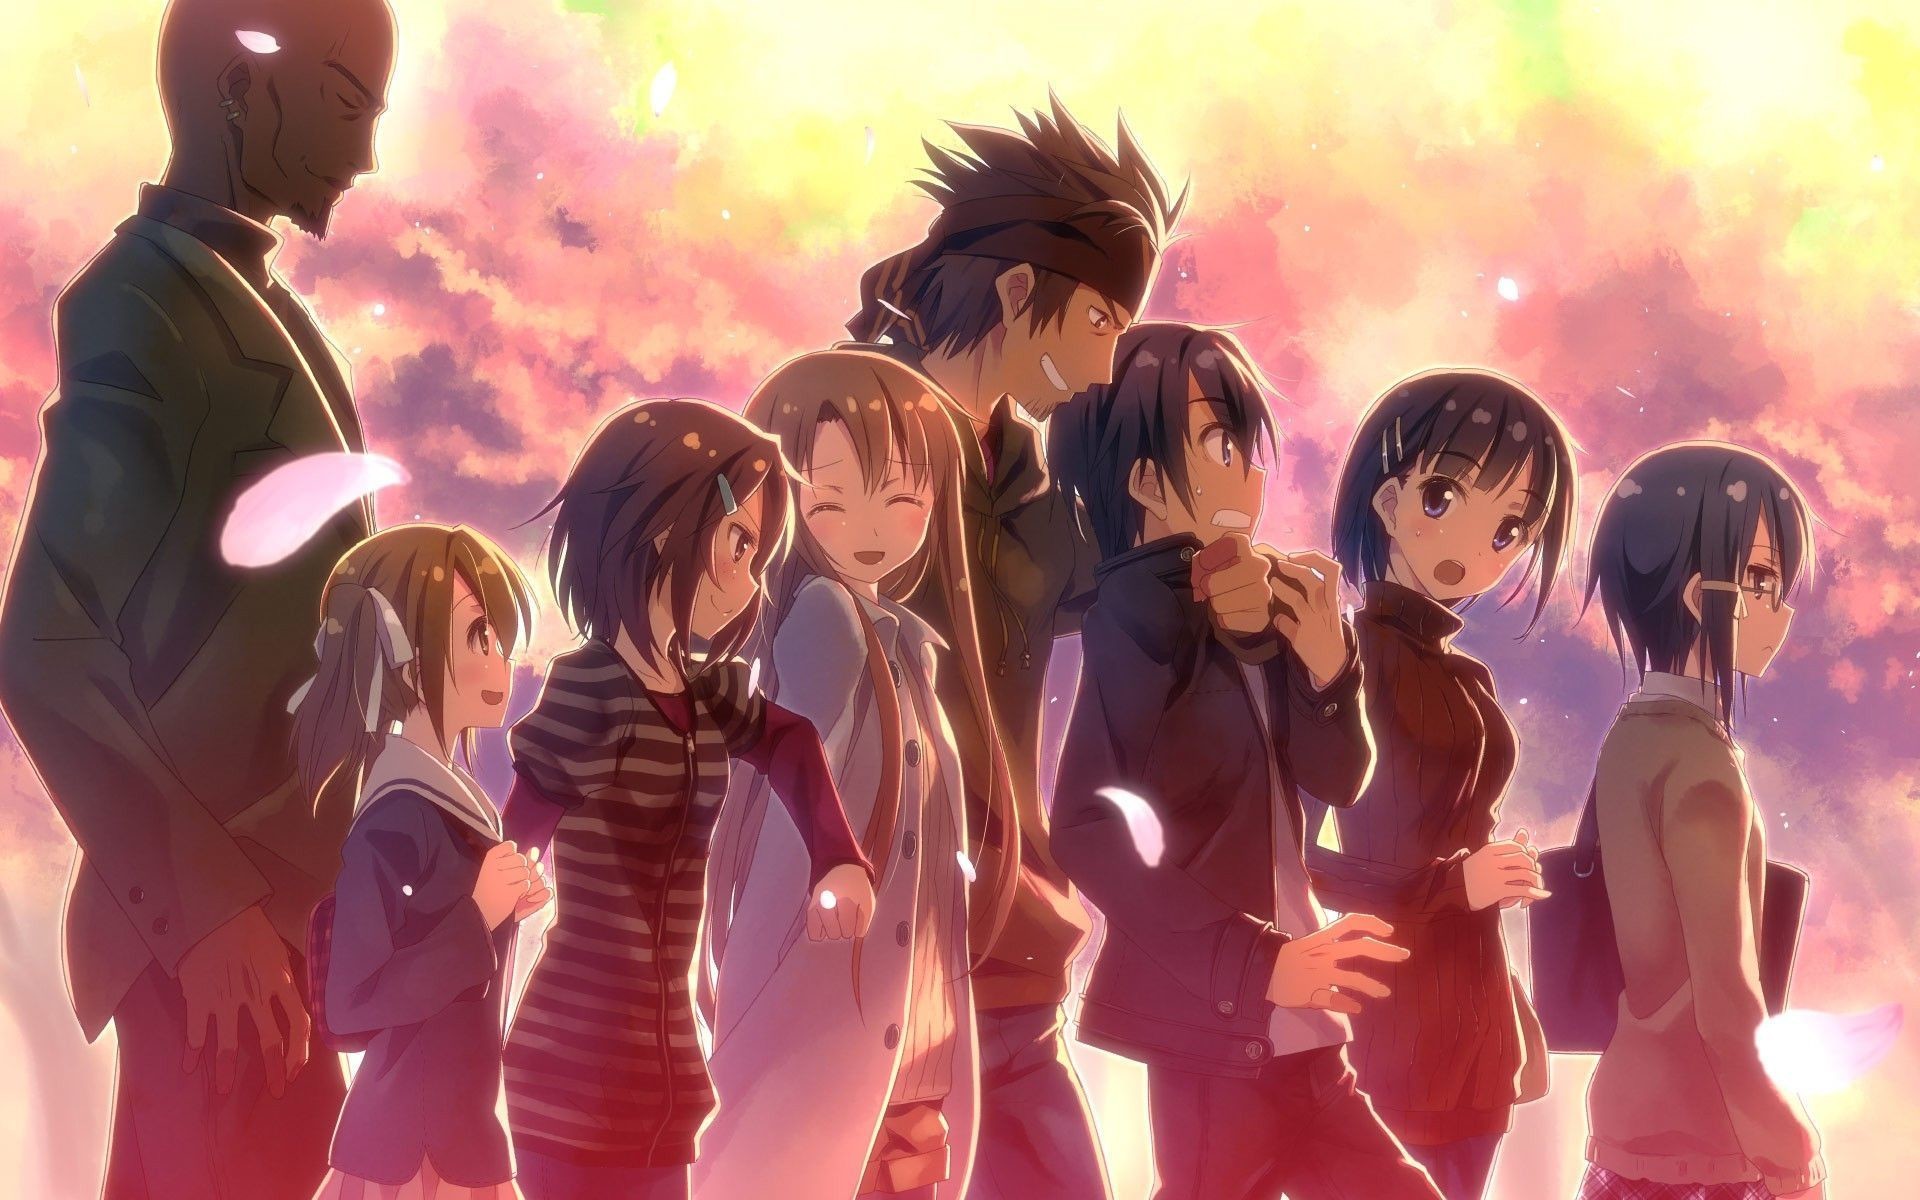 1920x1200 1920x1080 Sword Art Online, HD Wallpapers For Free